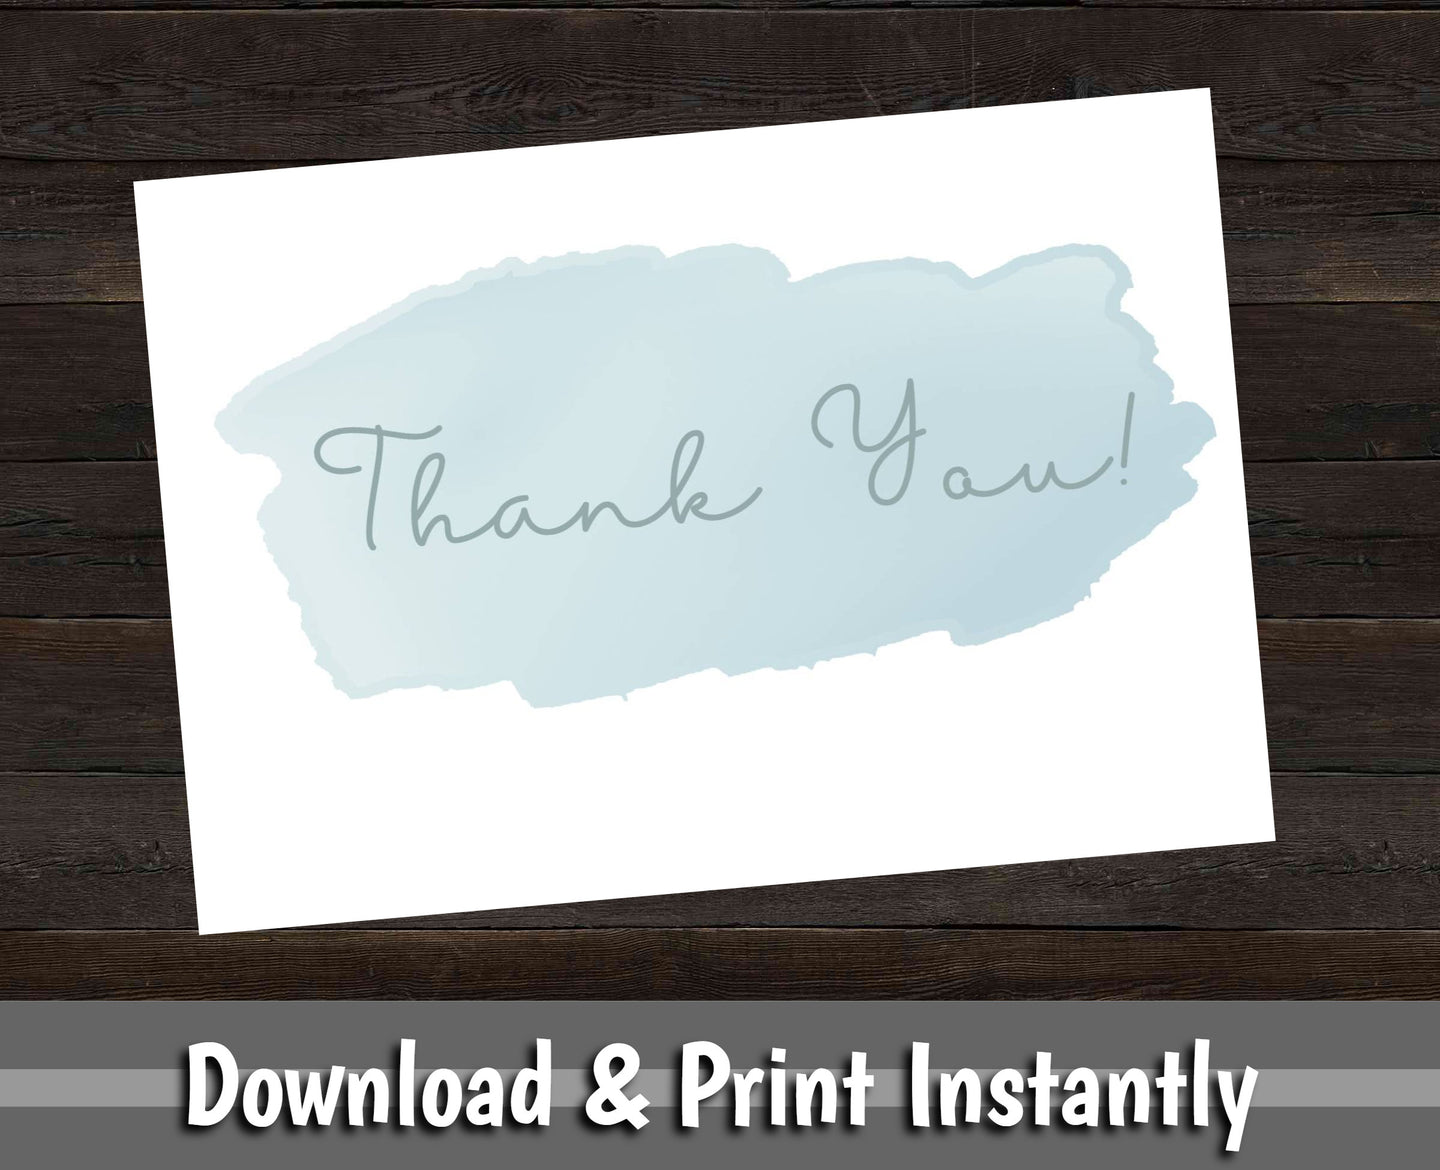 Baby Shower Thank You Card, Printable Thank You Cards, Baby Shower Invitation, Instant Download, Baby Boy, Blue, Watercolor, Calligraphy